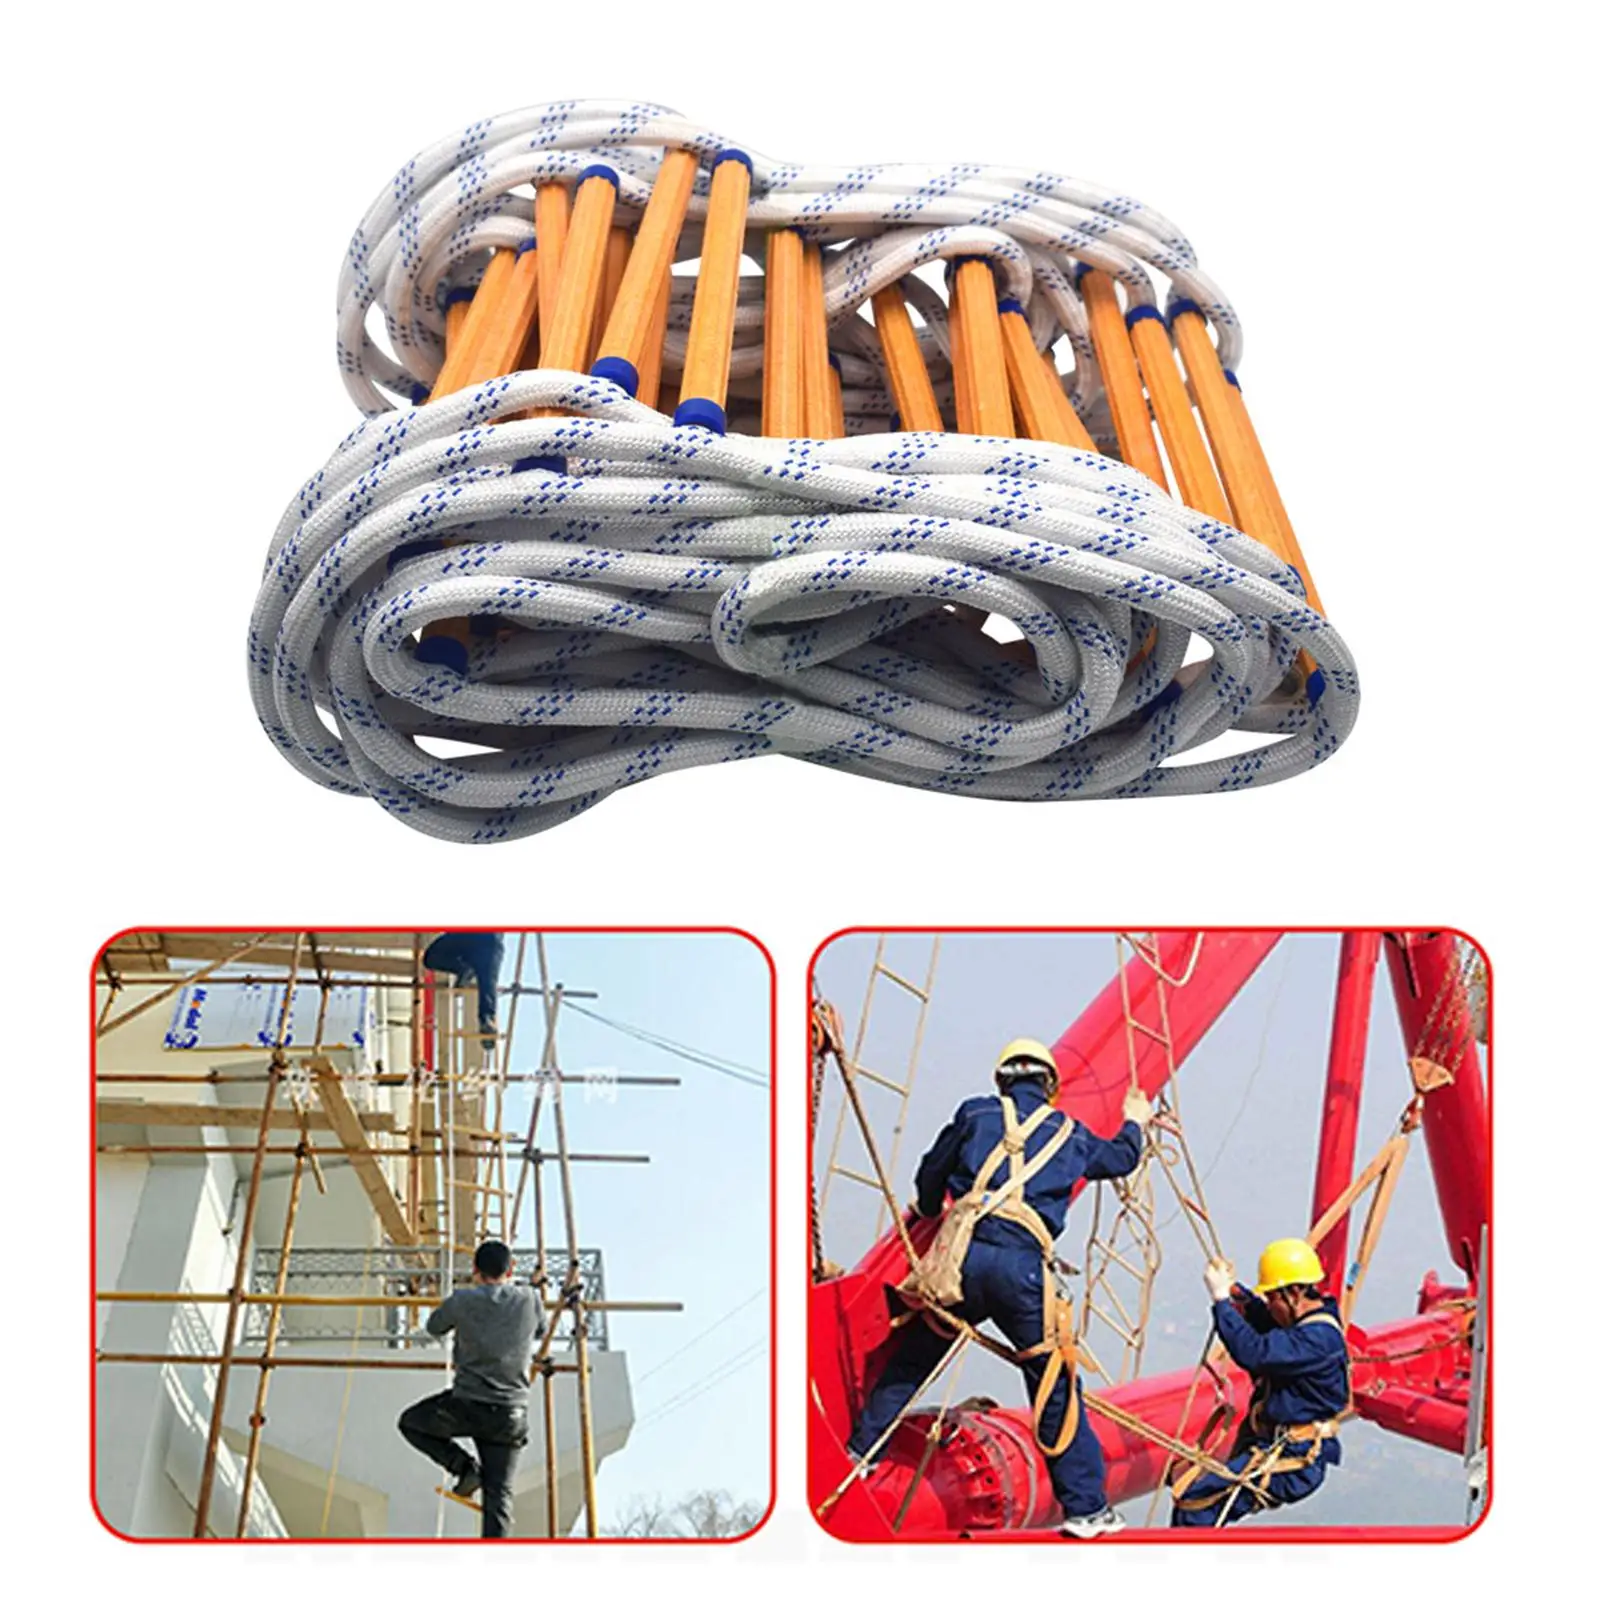 Emergency Escape Ladder Safety Rope Flame Resistant Reusable for Climbing